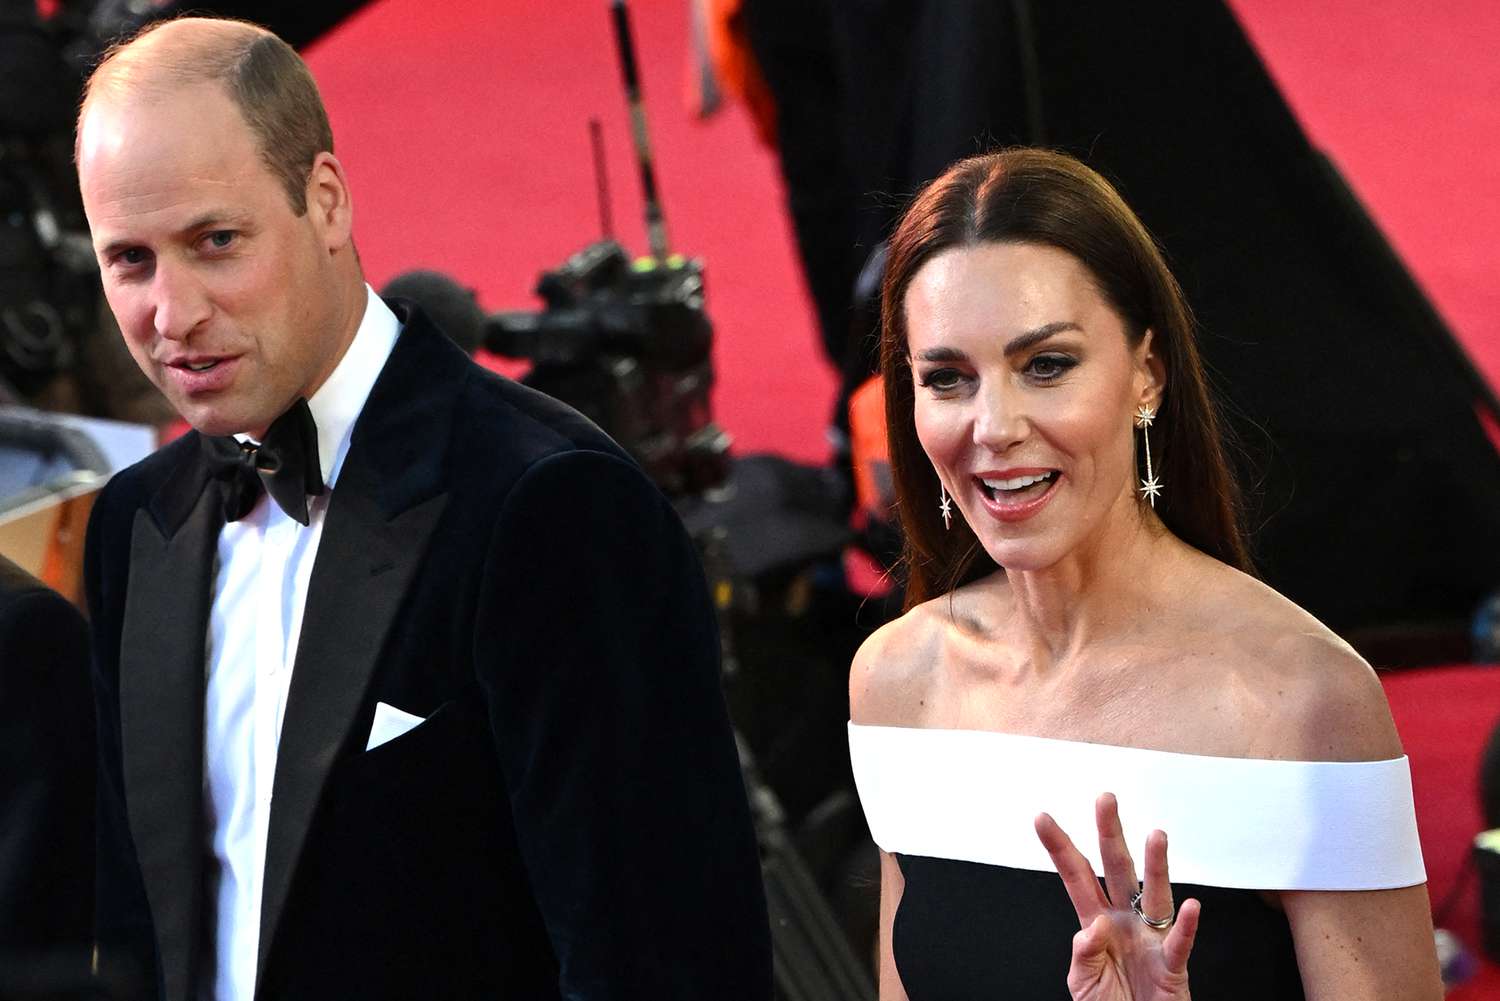 Kate Middleton and Prince William Hit the Red Carpet at Top Gun Premiere